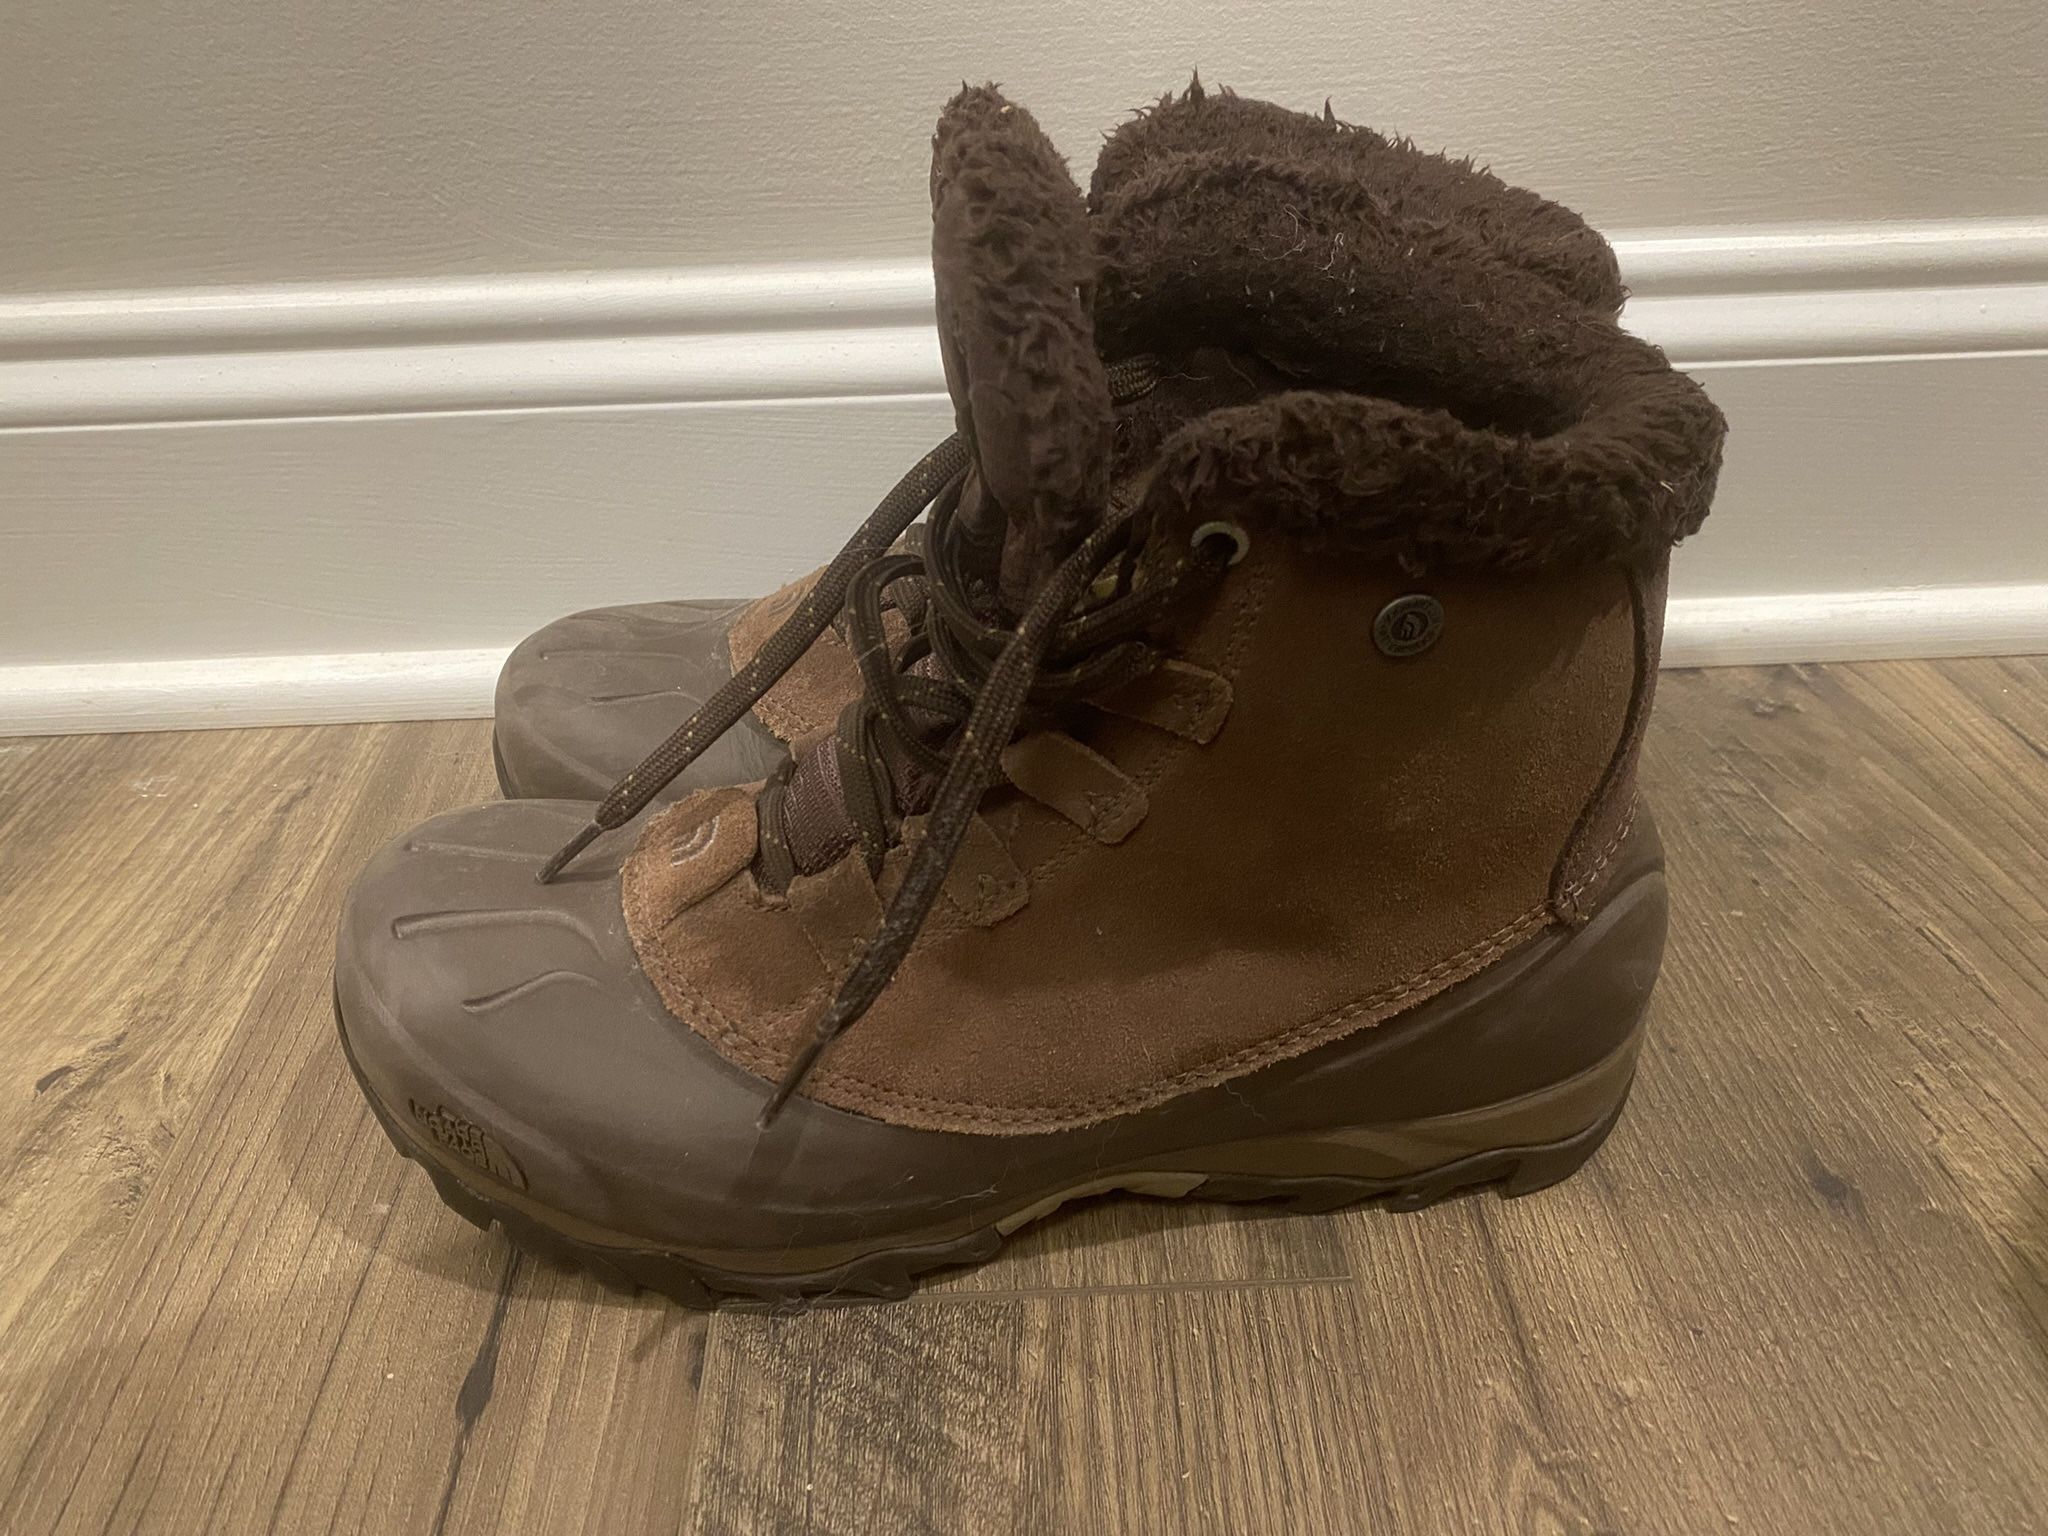 Women’s 9.5 Winter Snow Boots North Face